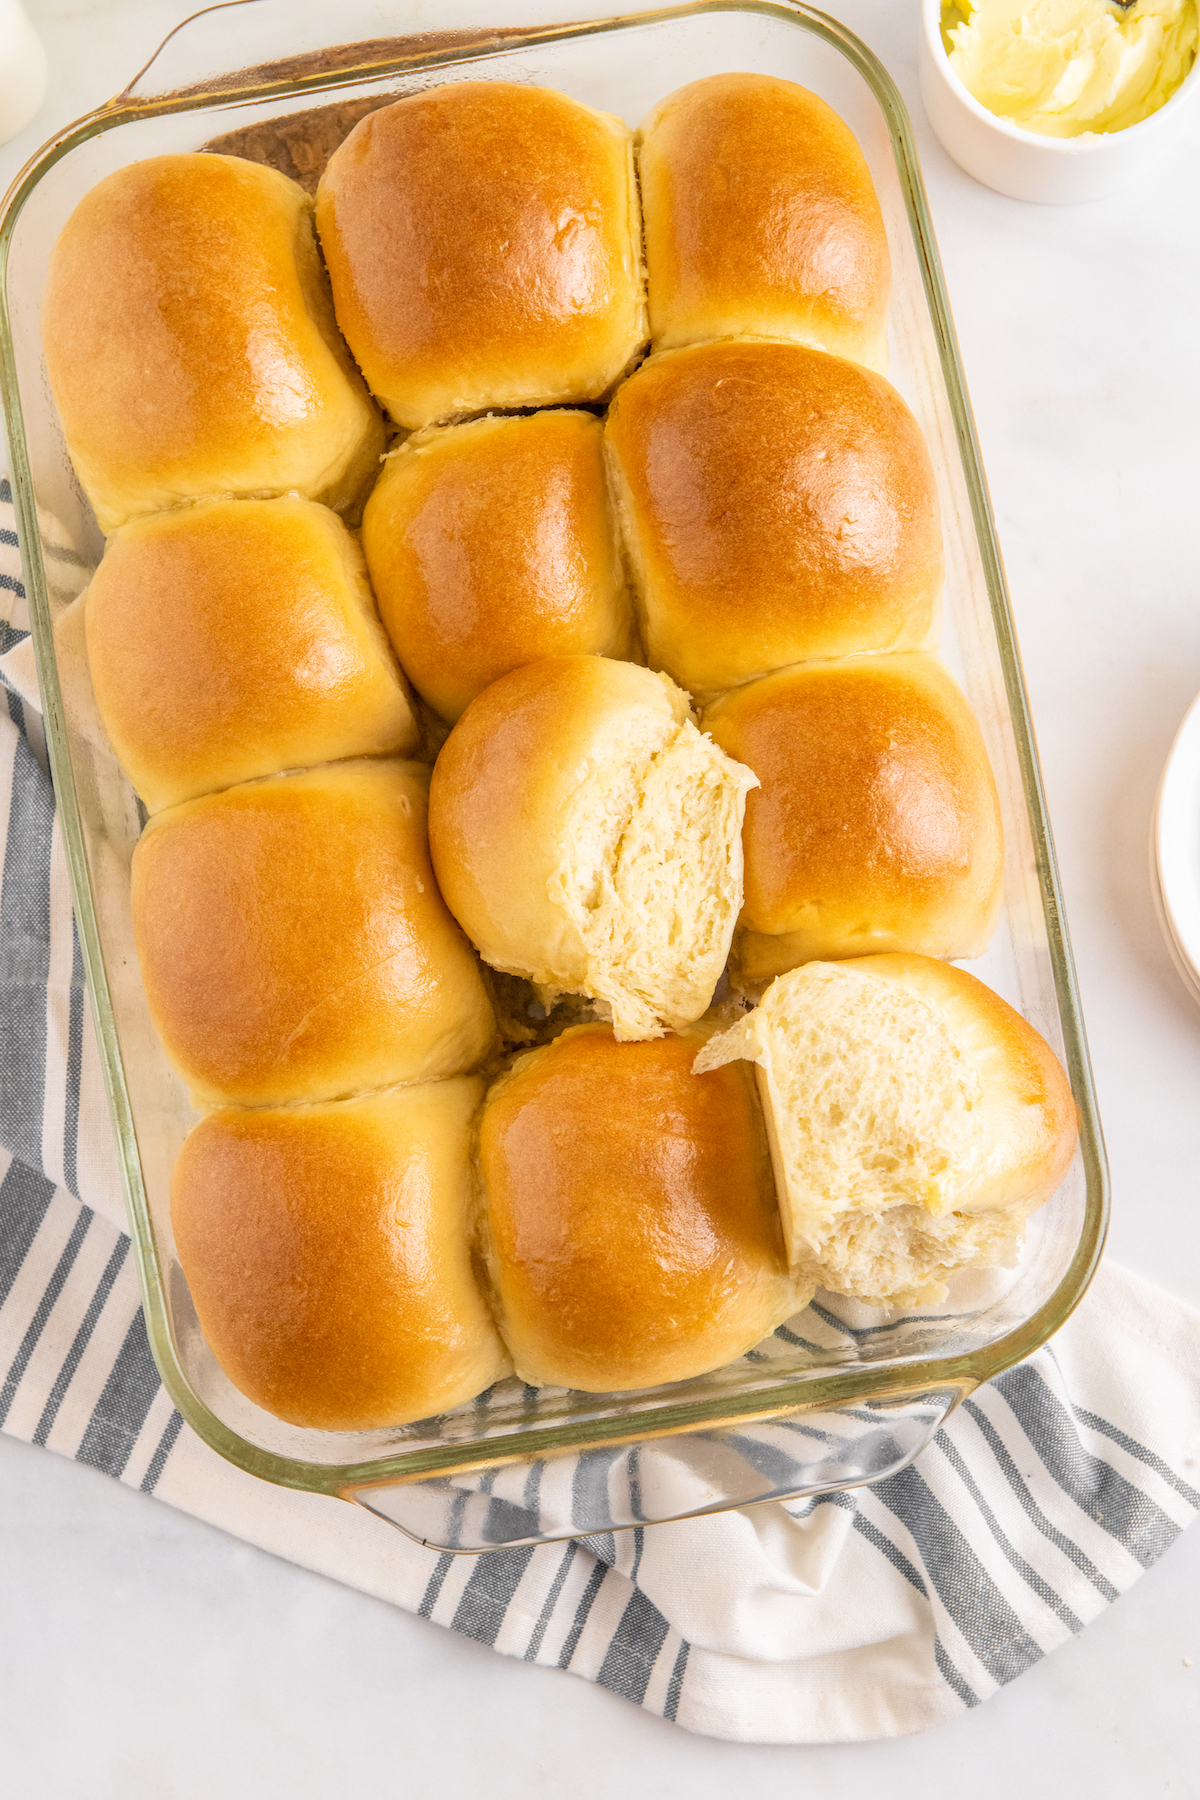 A pan of rolls, with one roll torn in half and placed on top of the others.